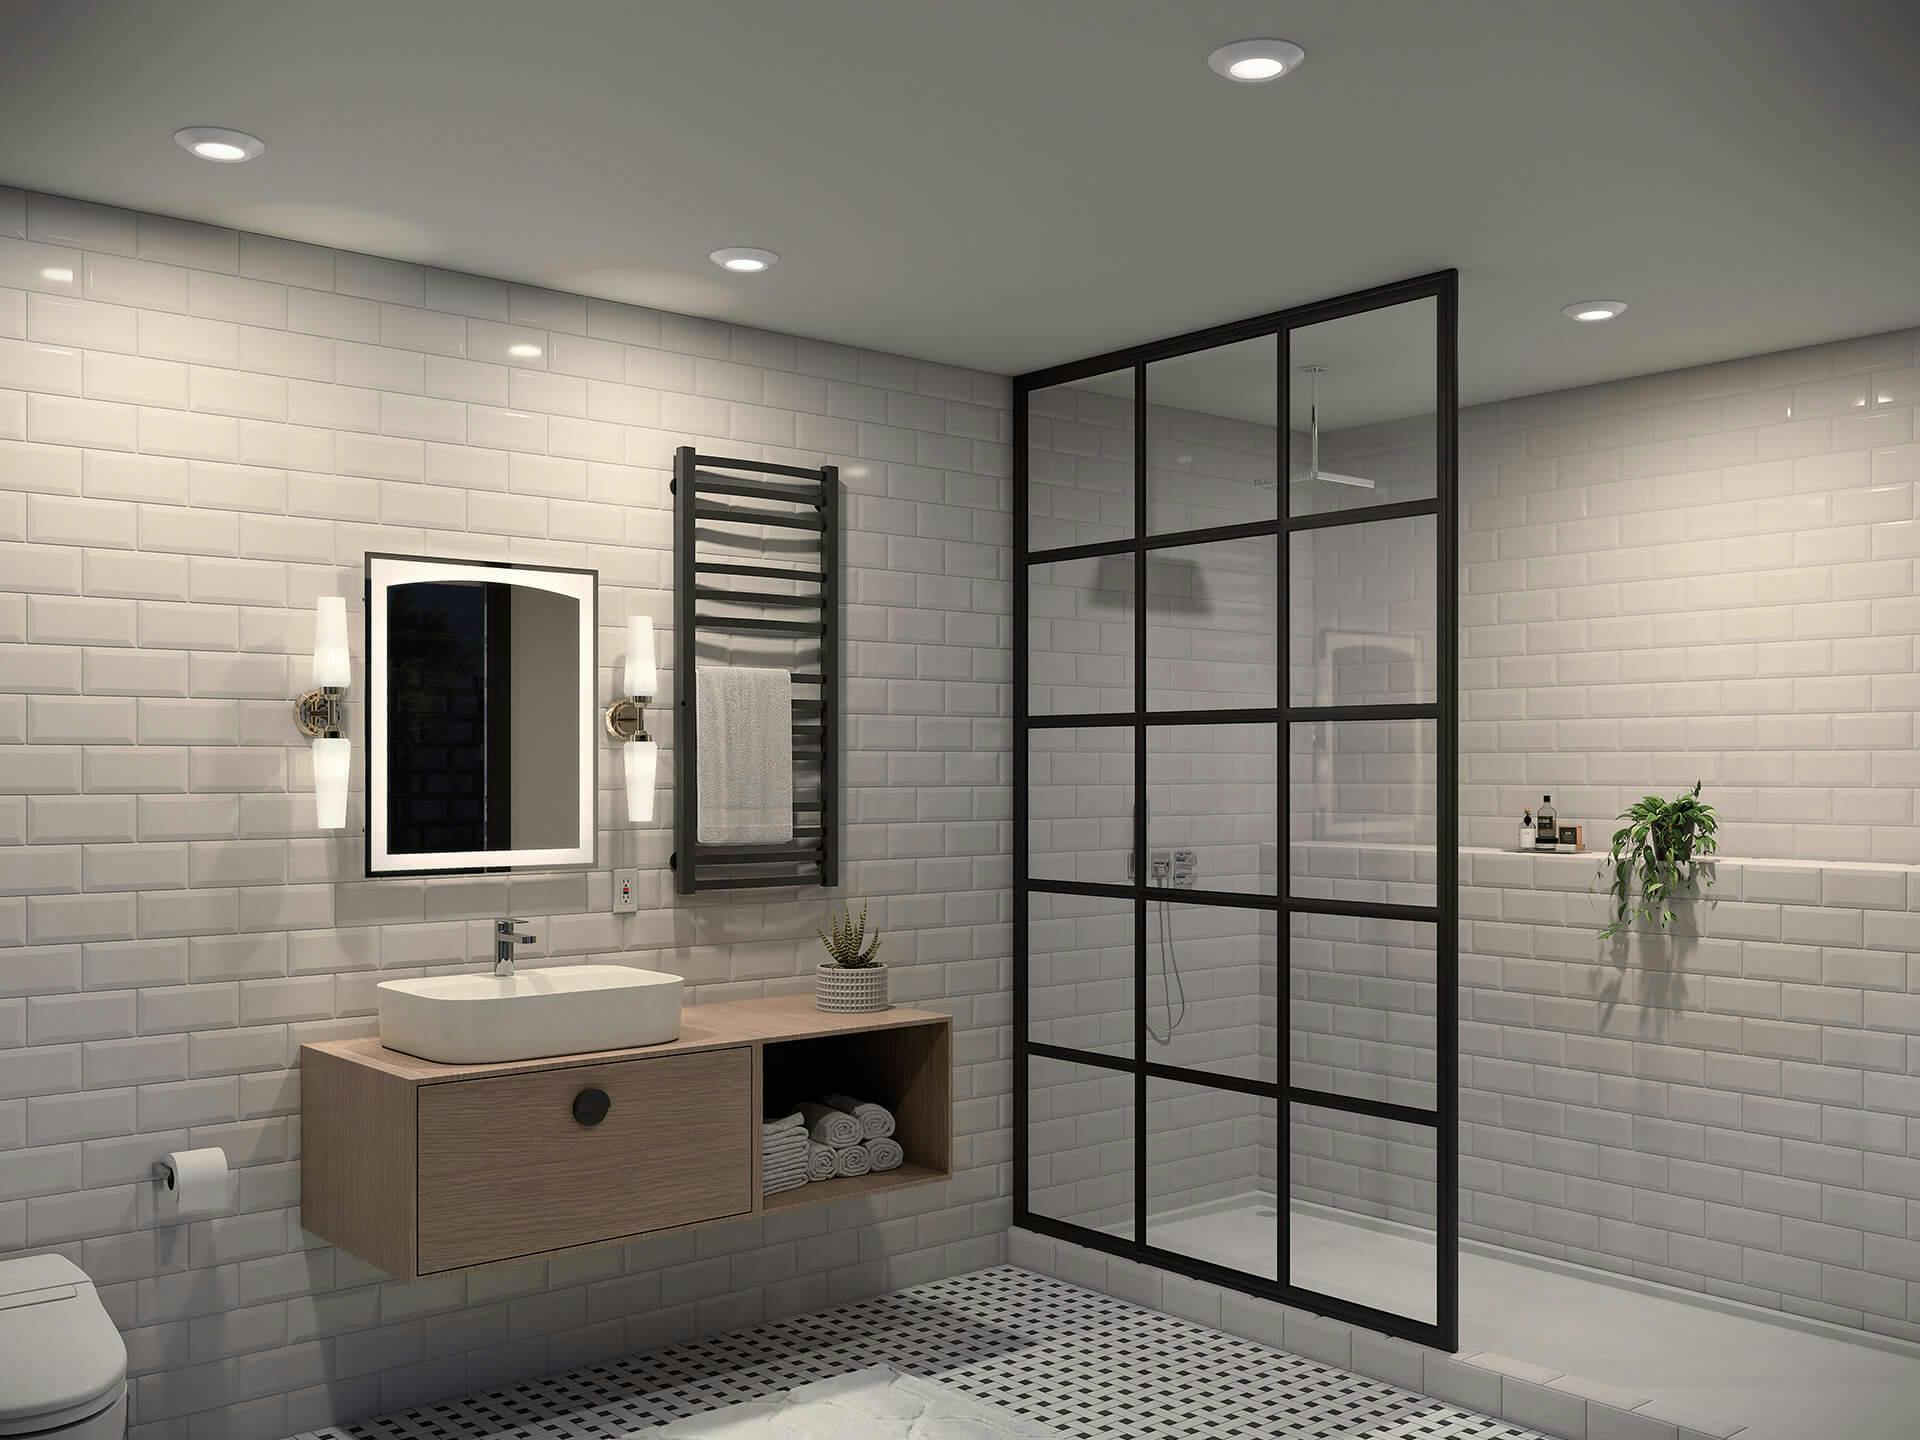 Bathroom with white subway tile walls and black glass shower and Horizon III recessed lights